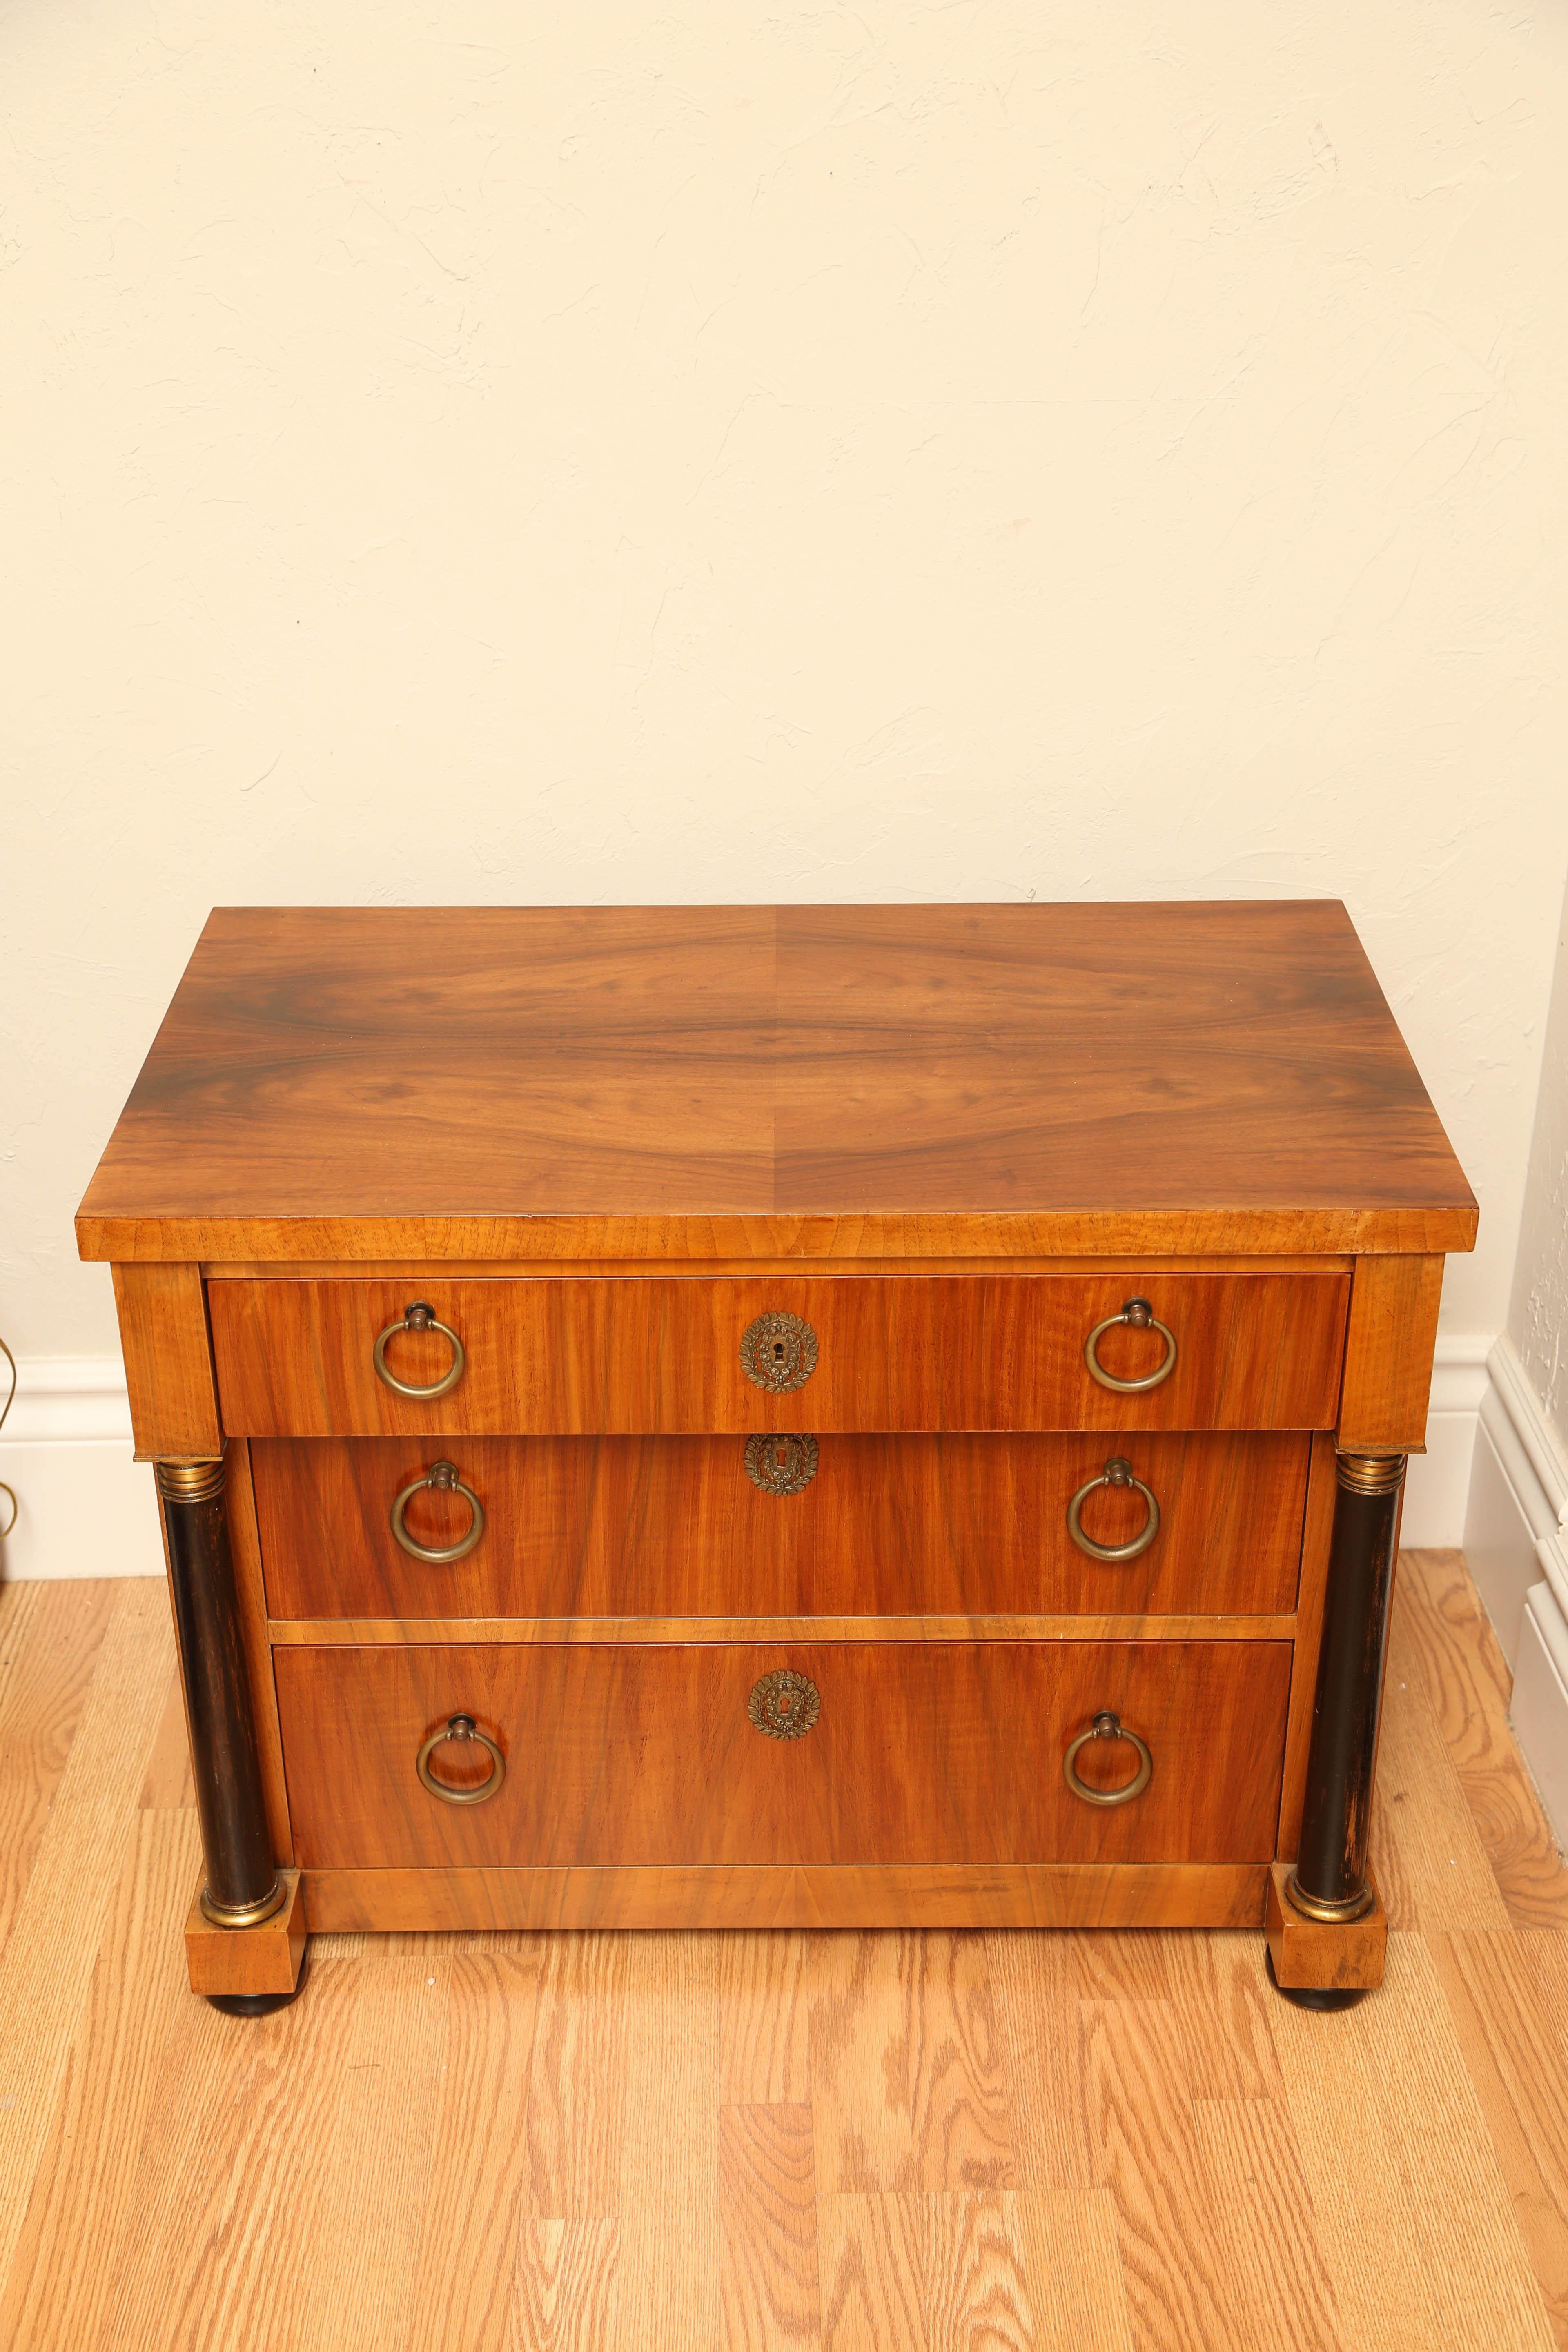 Three-drawer Biedermeier style chest or side table by Baker.